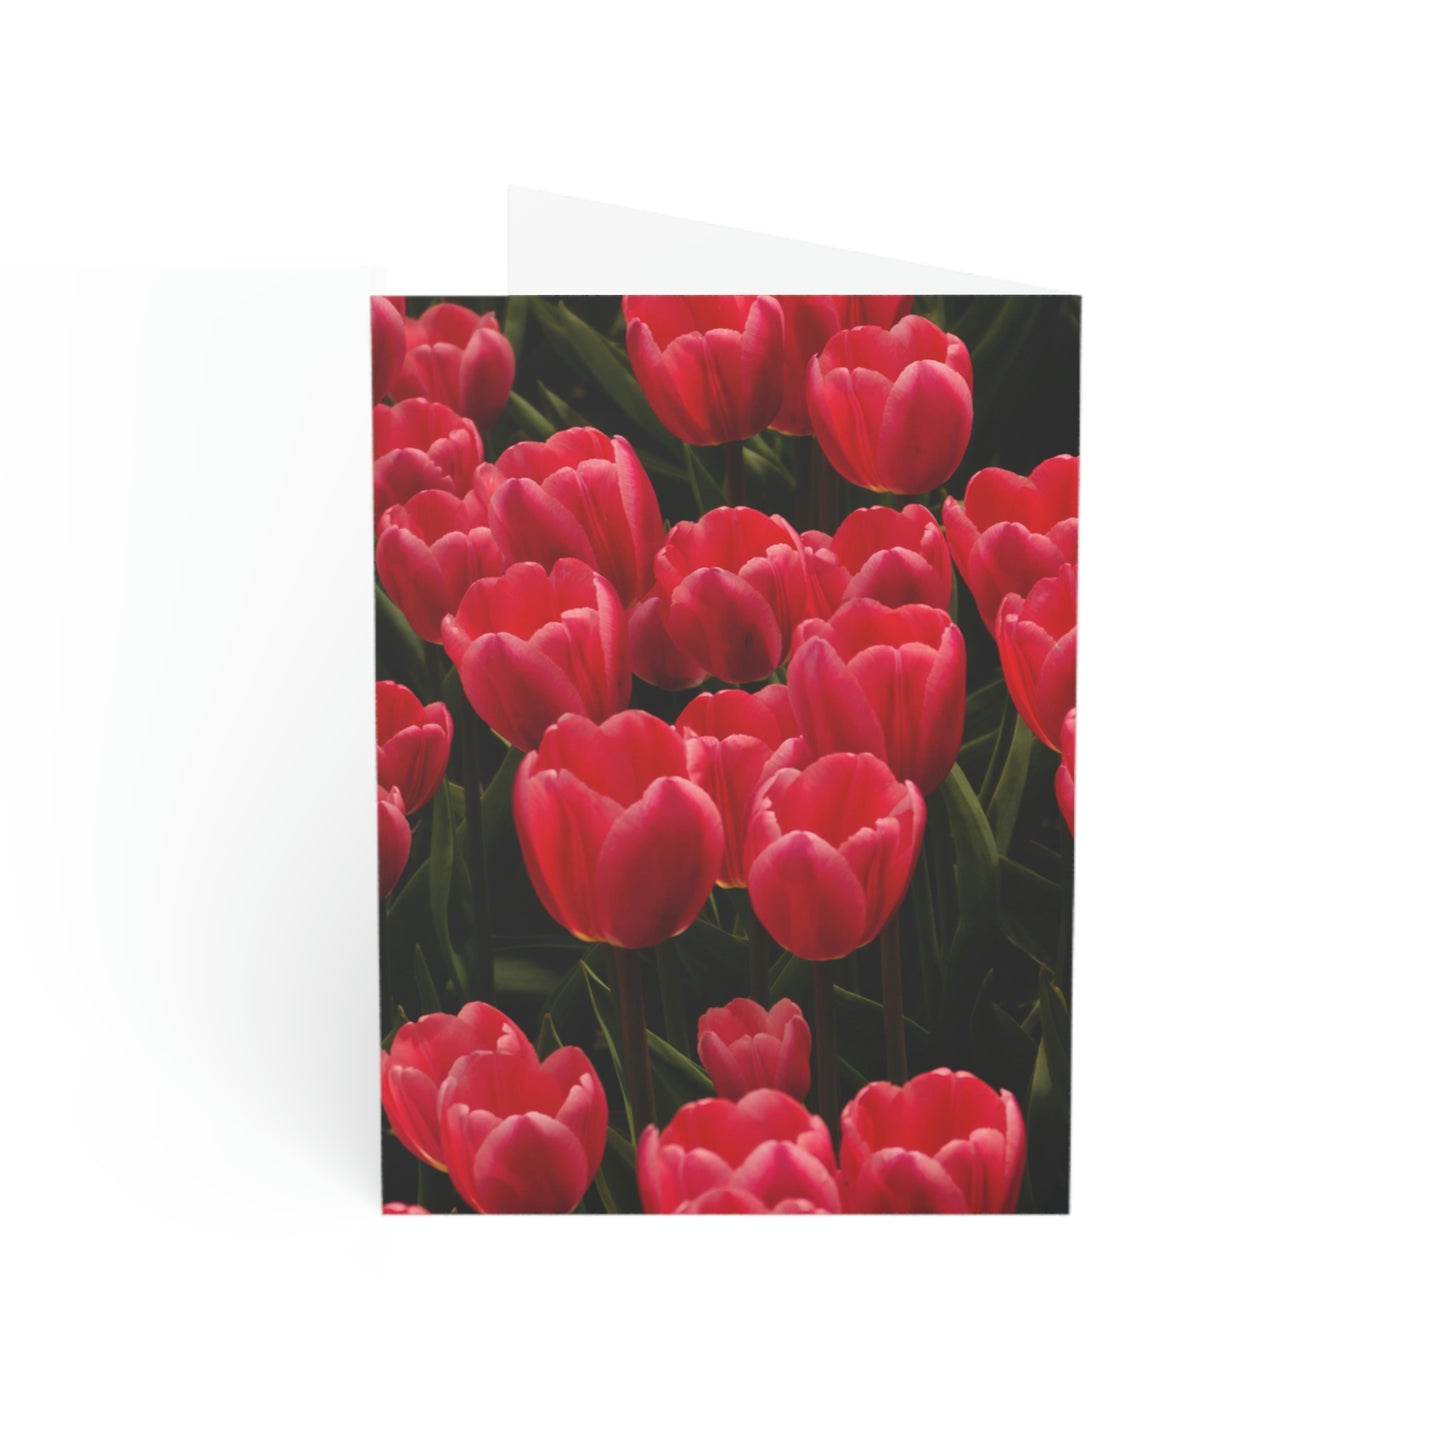 Flowers 24 Greeting Cards (1, 10, 30, and 50pcs)